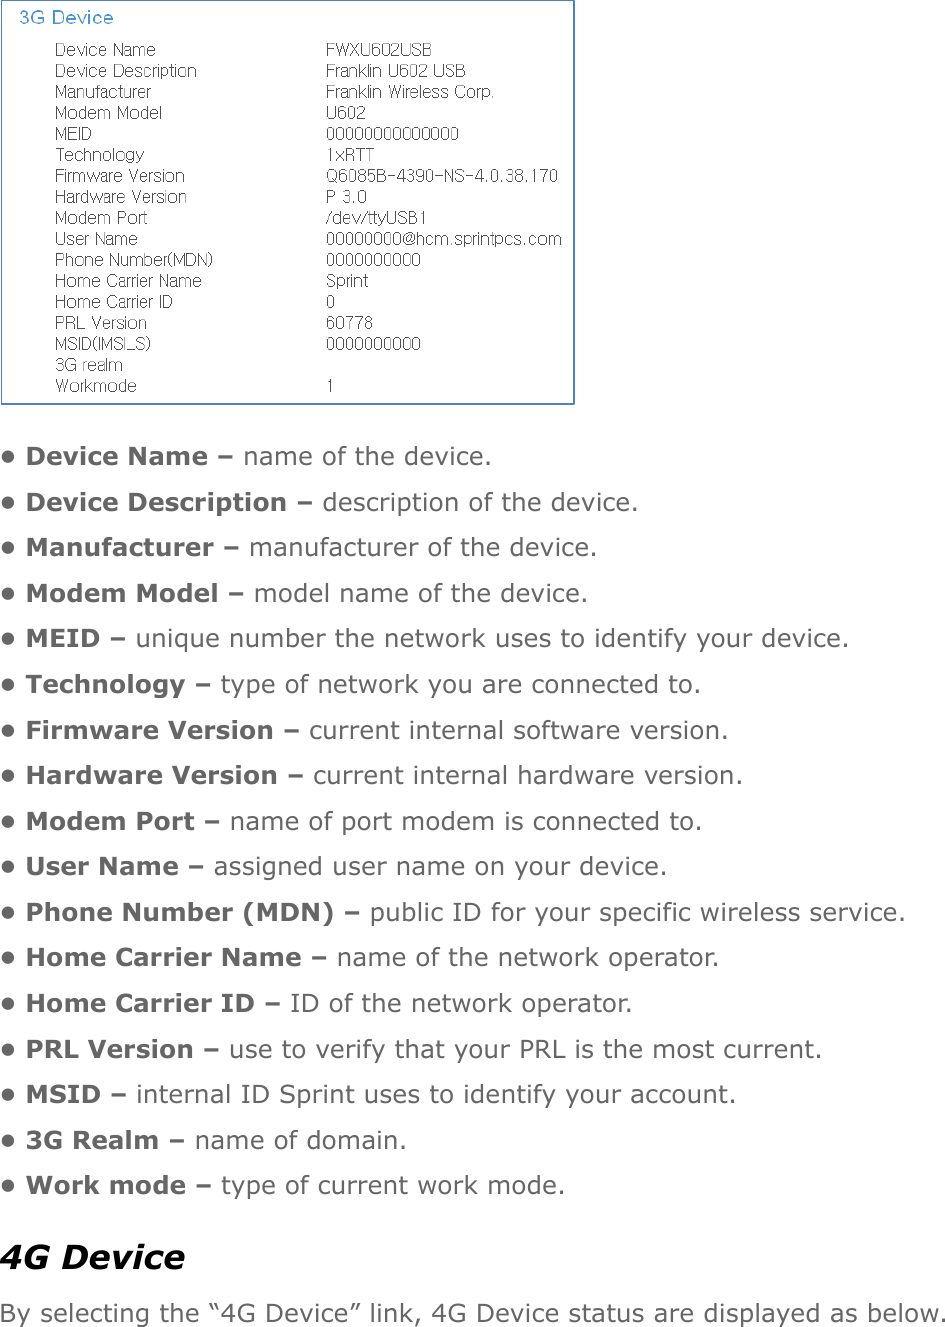  • Device Name – name of the device. • Device Description – description of the device. • Manufacturer – manufacturer of the device. • Modem Model – model name of the device. • MEID – unique number the network uses to identify your device. • Technology – type of network you are connected to. • Firmware Version – current internal software version. • Hardware Version – current internal hardware version. • Modem Port – name of port modem is connected to. • User Name – assigned user name on your device. • Phone Number (MDN) – public ID for your specific wireless service. • Home Carrier Name – name of the network operator. • Home Carrier ID – ID of the network operator. • PRL Version – use to verify that your PRL is the most current. • MSID – internal ID Sprint uses to identify your account. • 3G Realm – name of domain. • Work mode – type of current work mode. 4G Device By selecting the “4G Device” link, 4G Device status are displayed as below. 